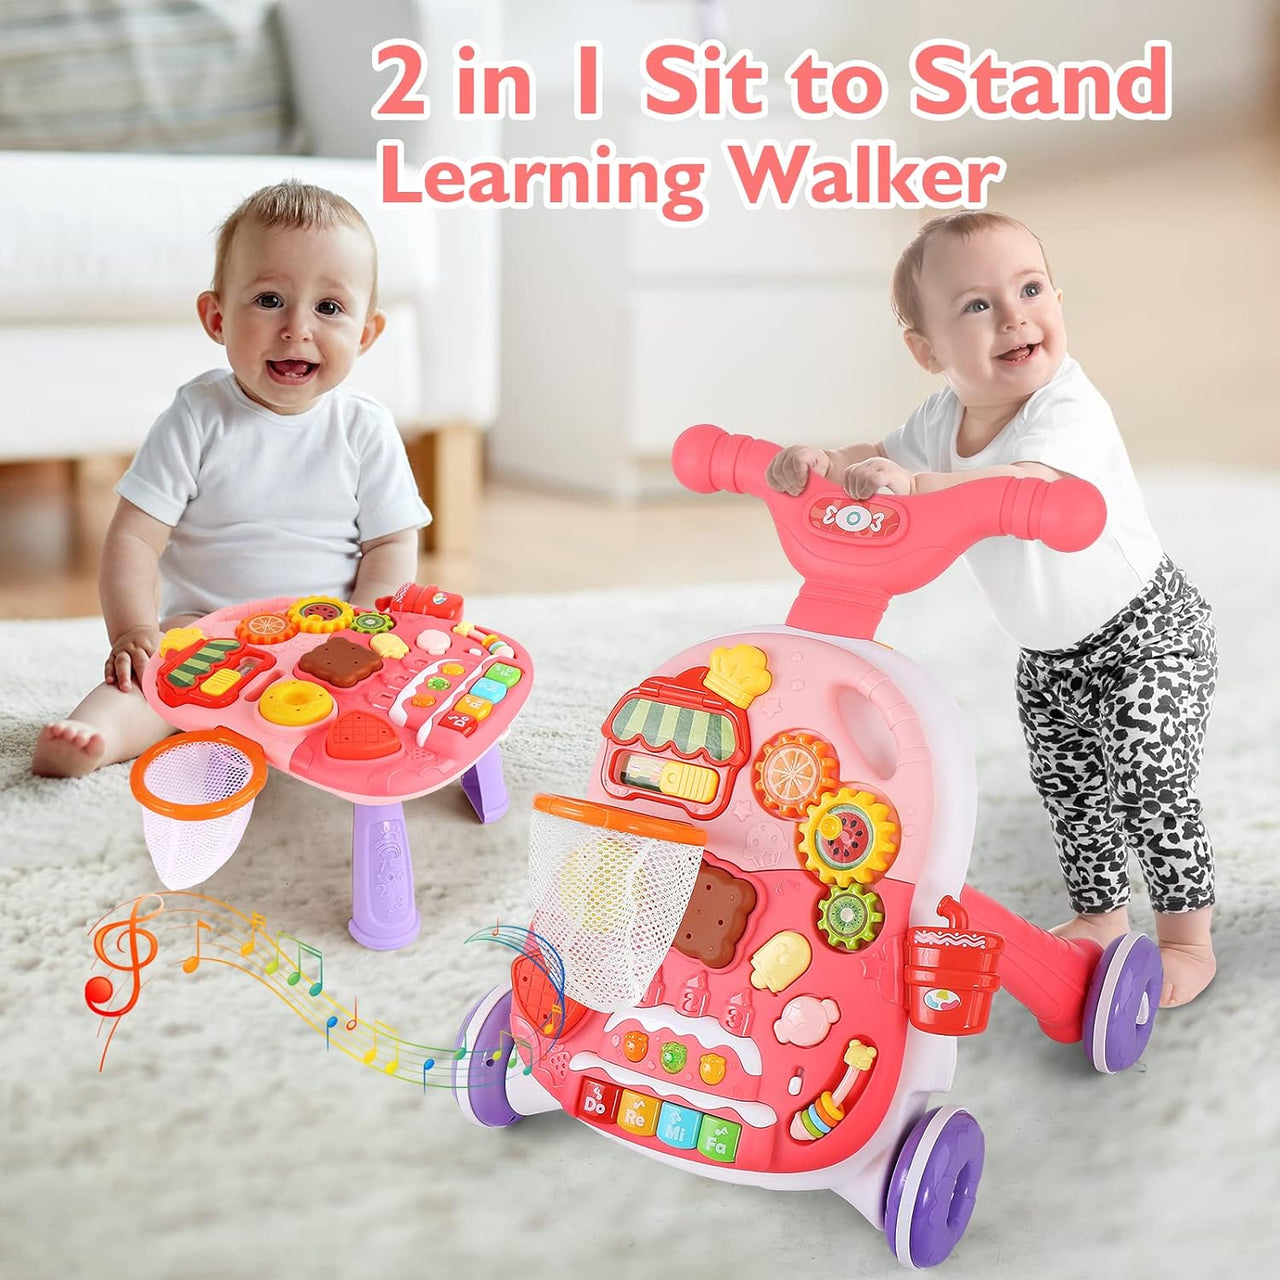 Huanger 2in1 Baby Musical Walker & Activity Table - Pink